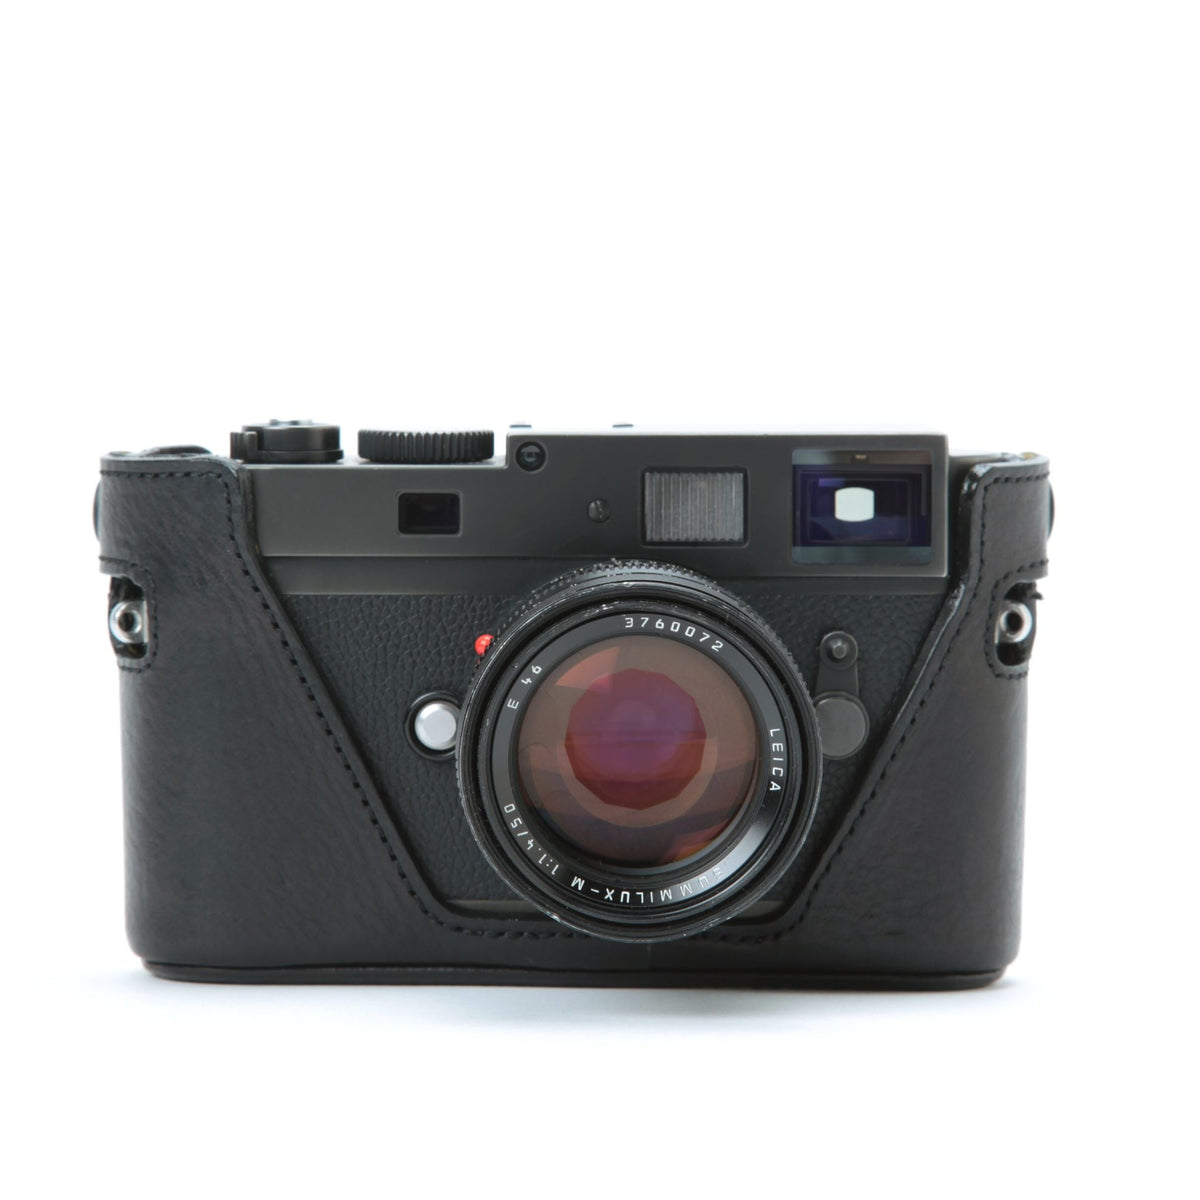 LMB-M9NA Leica Body Case - Leather Case for Leica M9